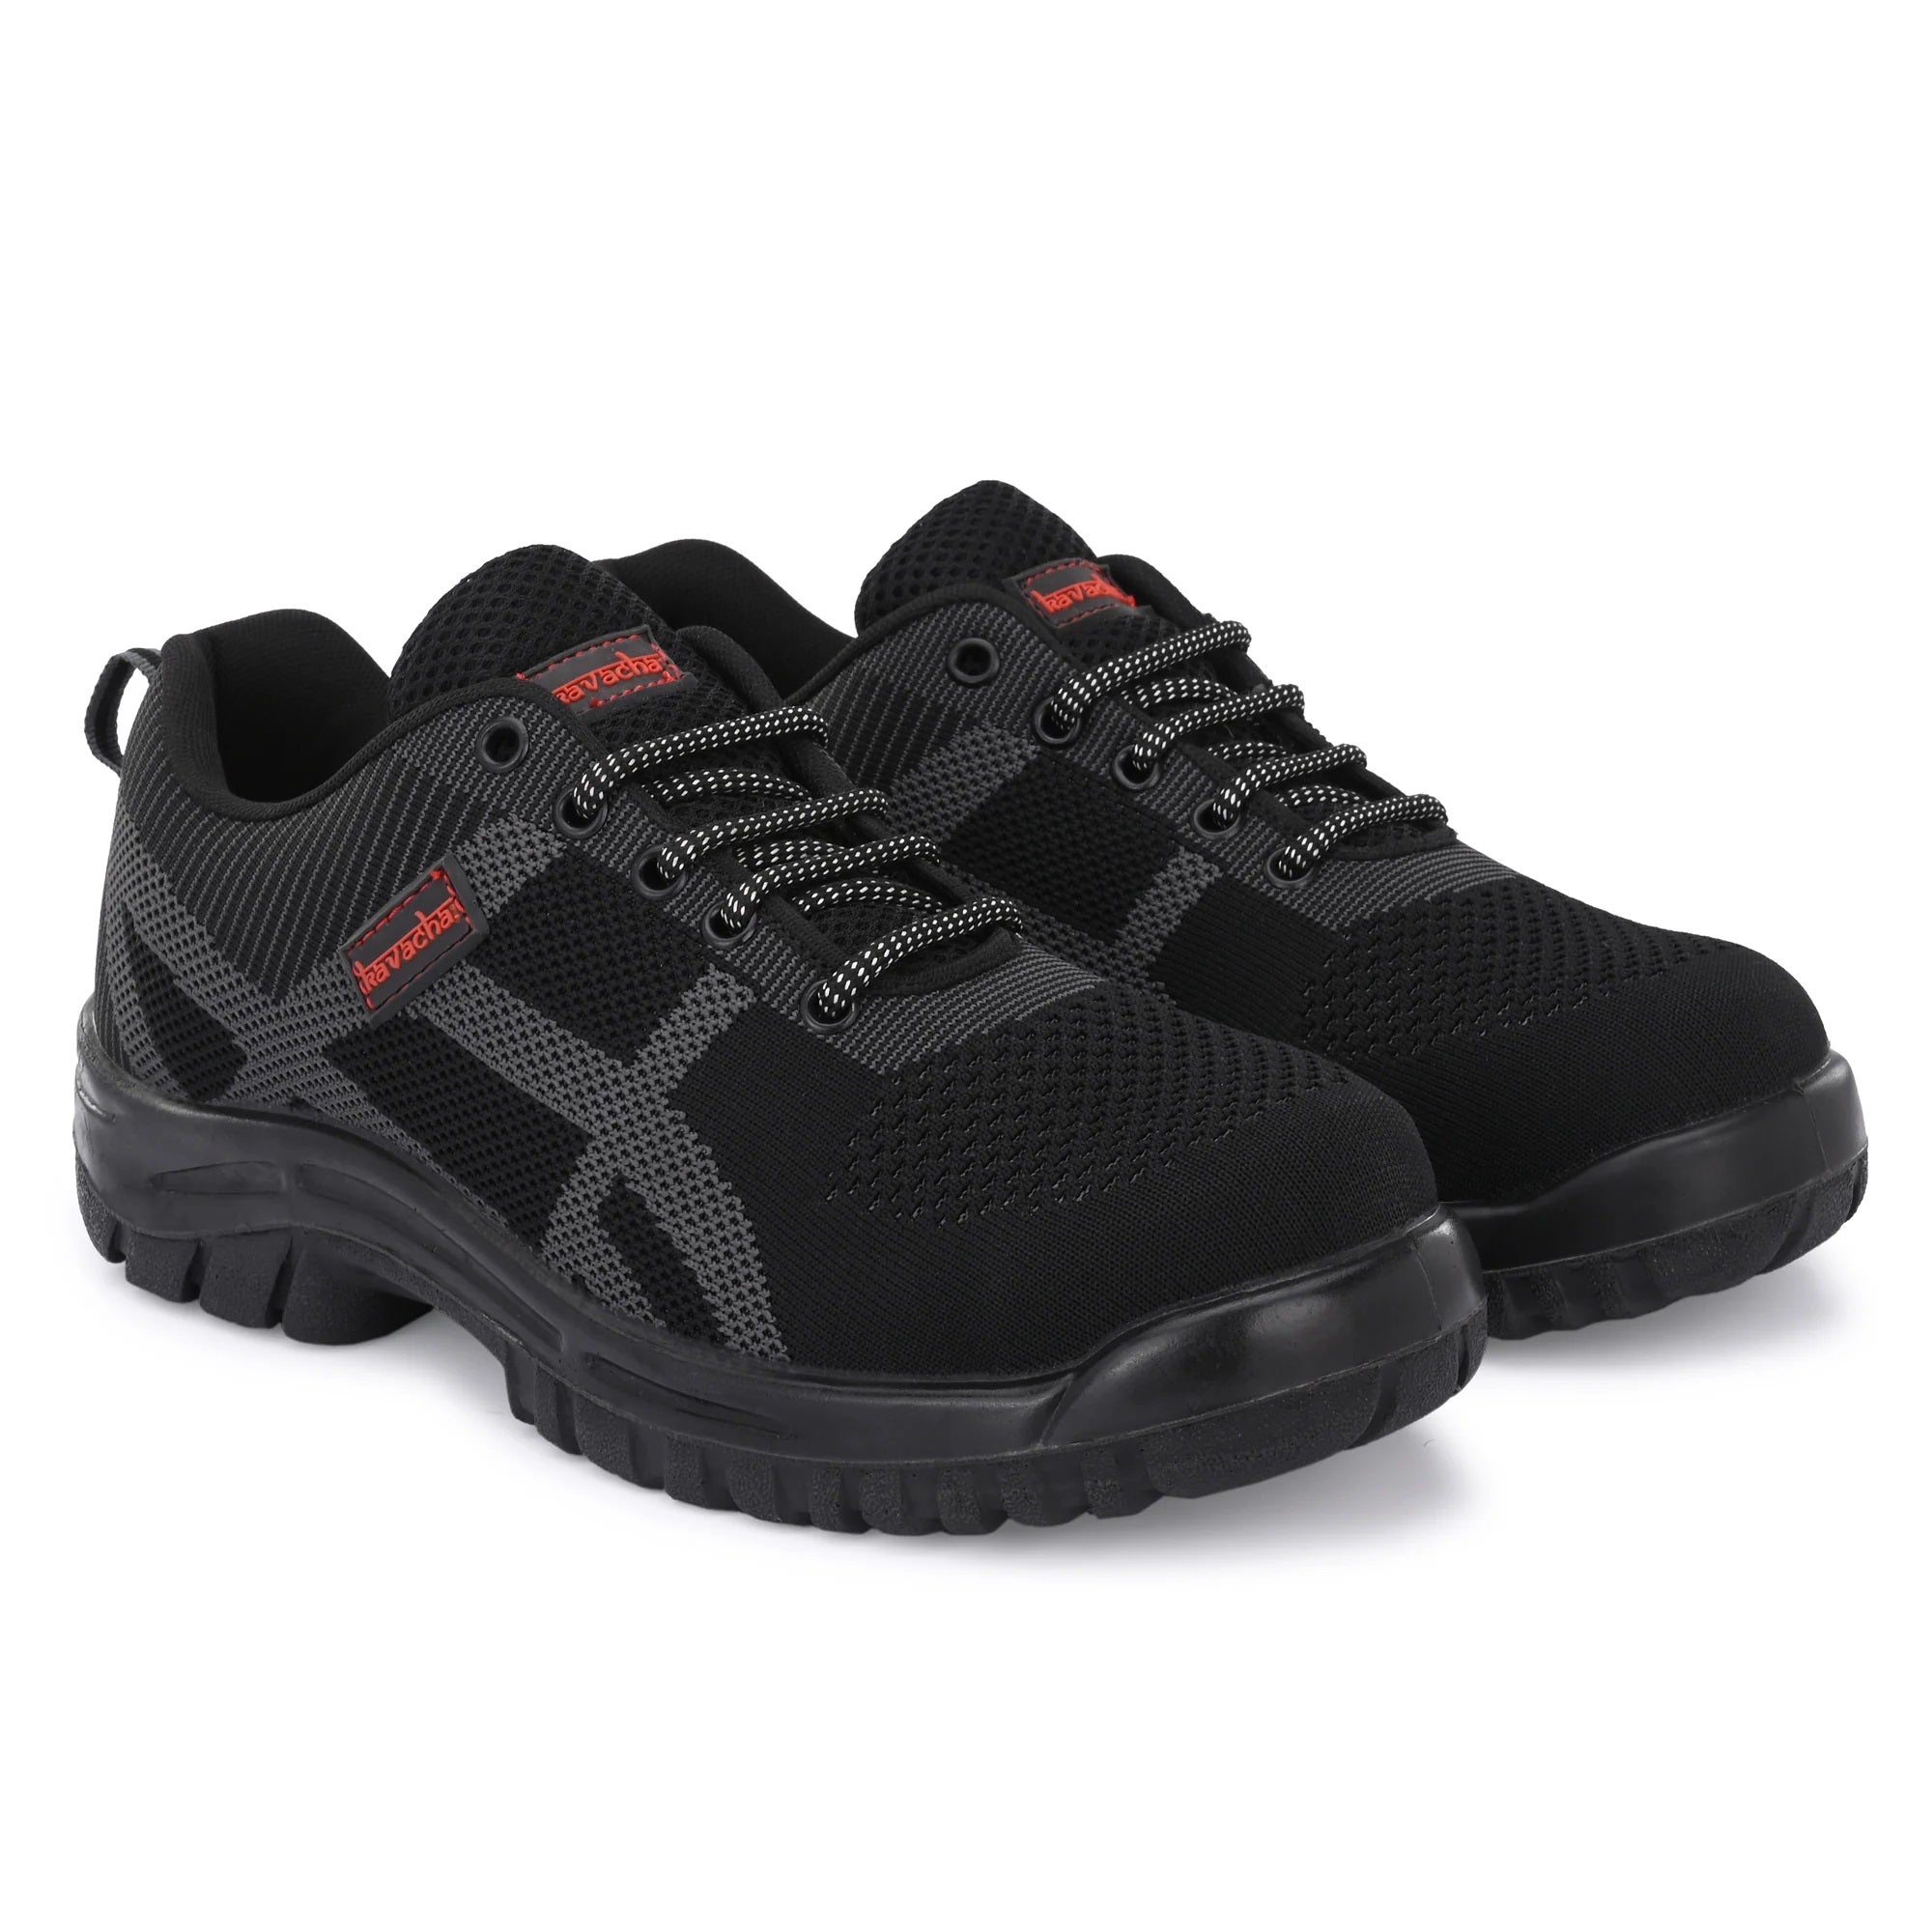 Kavacha Steel Toe Safety Shoe with Knitted Upper and PU Sole Air S211